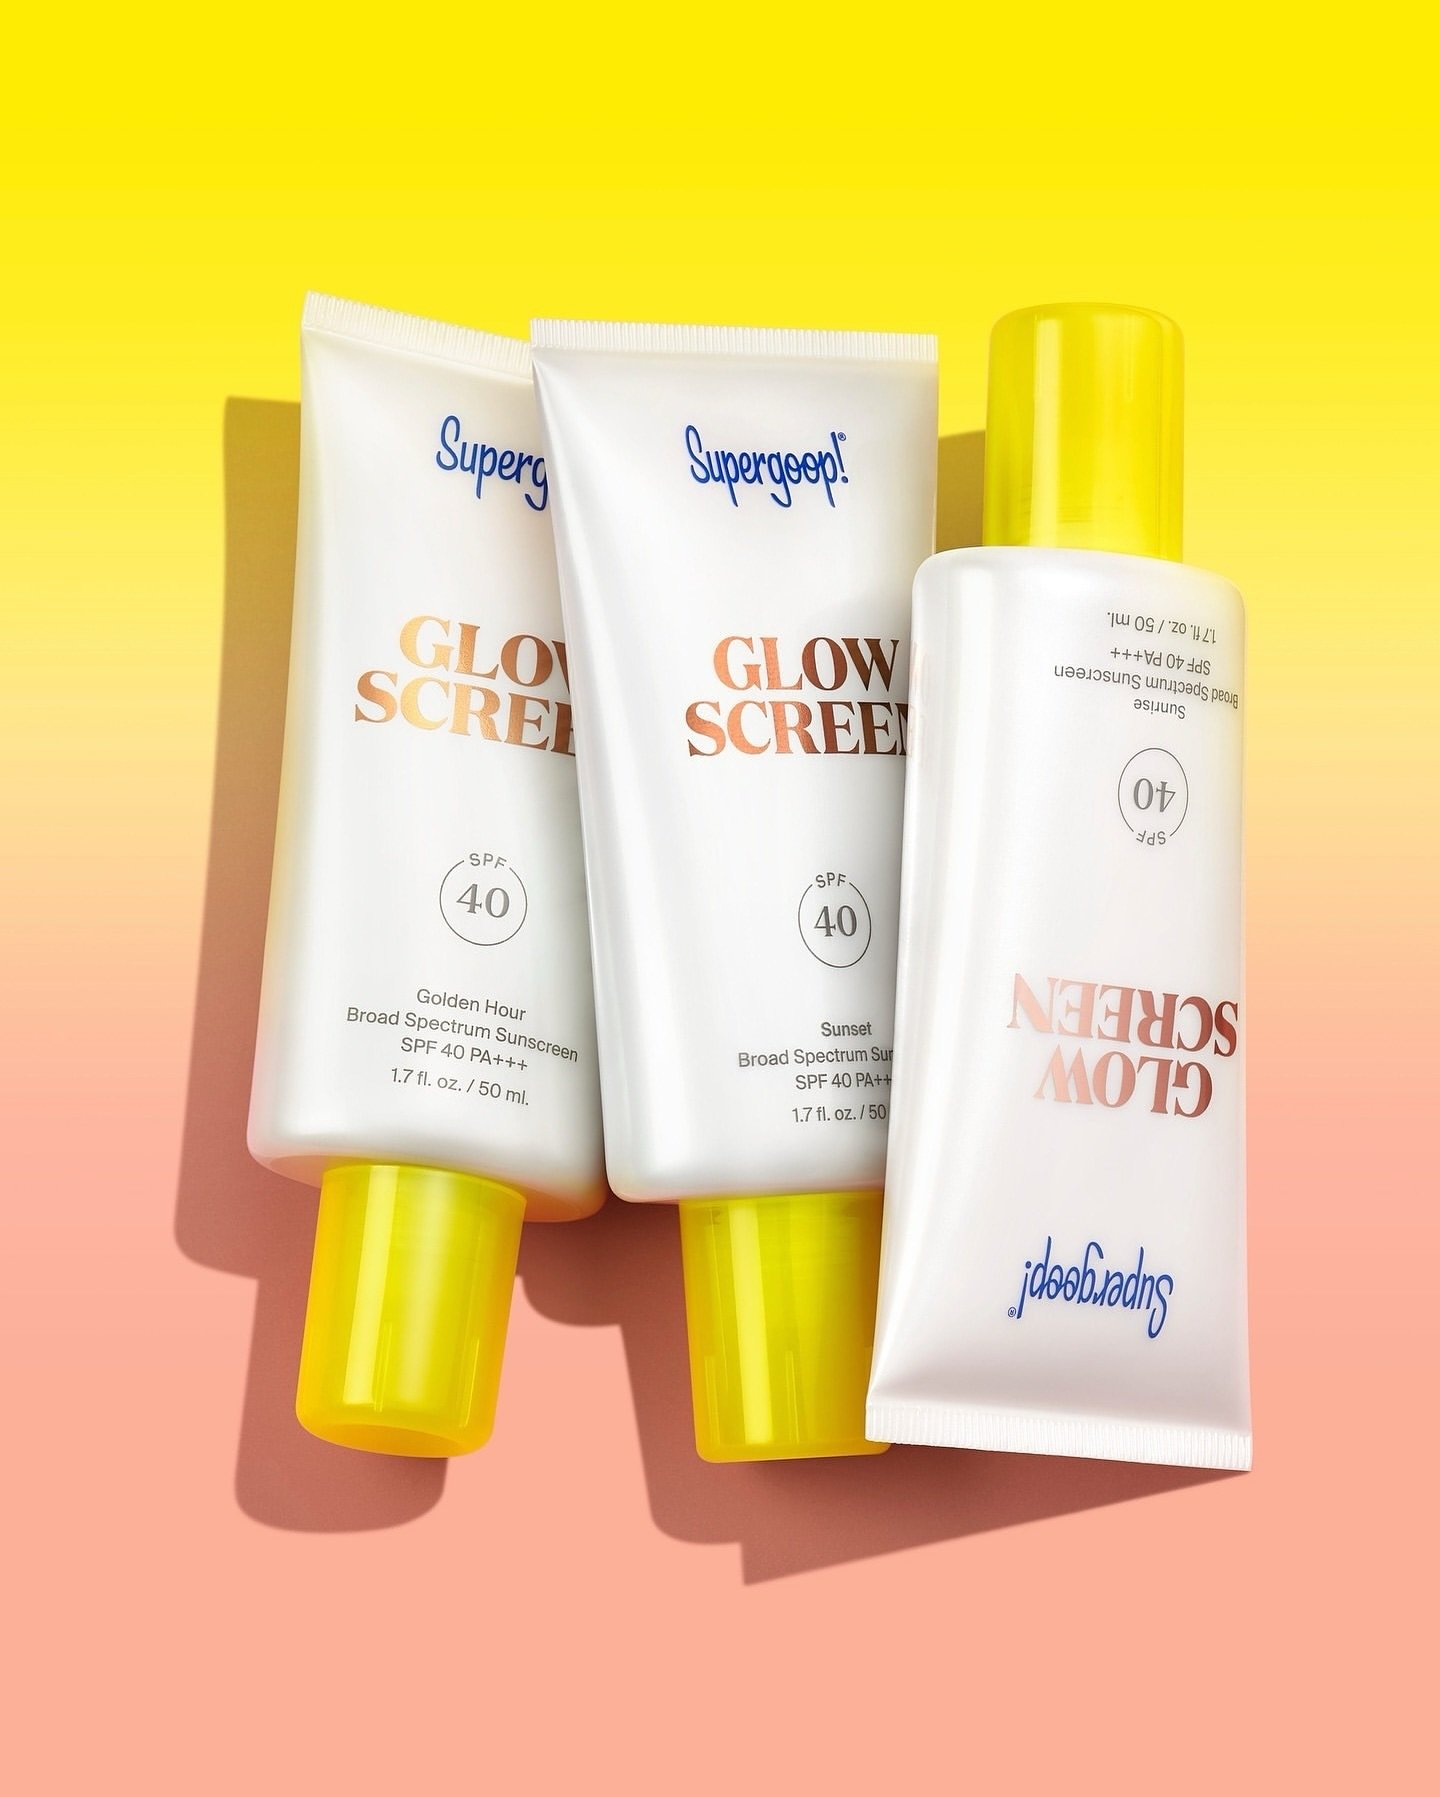 Glow your way with our cult-fave Glowscreen SPF 40 available in 4 flexible shades! Wear it alone, under makeup or to highlight and bronze.✨✨✨
.
.
.
.
#spfeveryday #supergoop #bushardspharmacy #neighborhoodpharmacy #shopsmall #lagunapharmacy